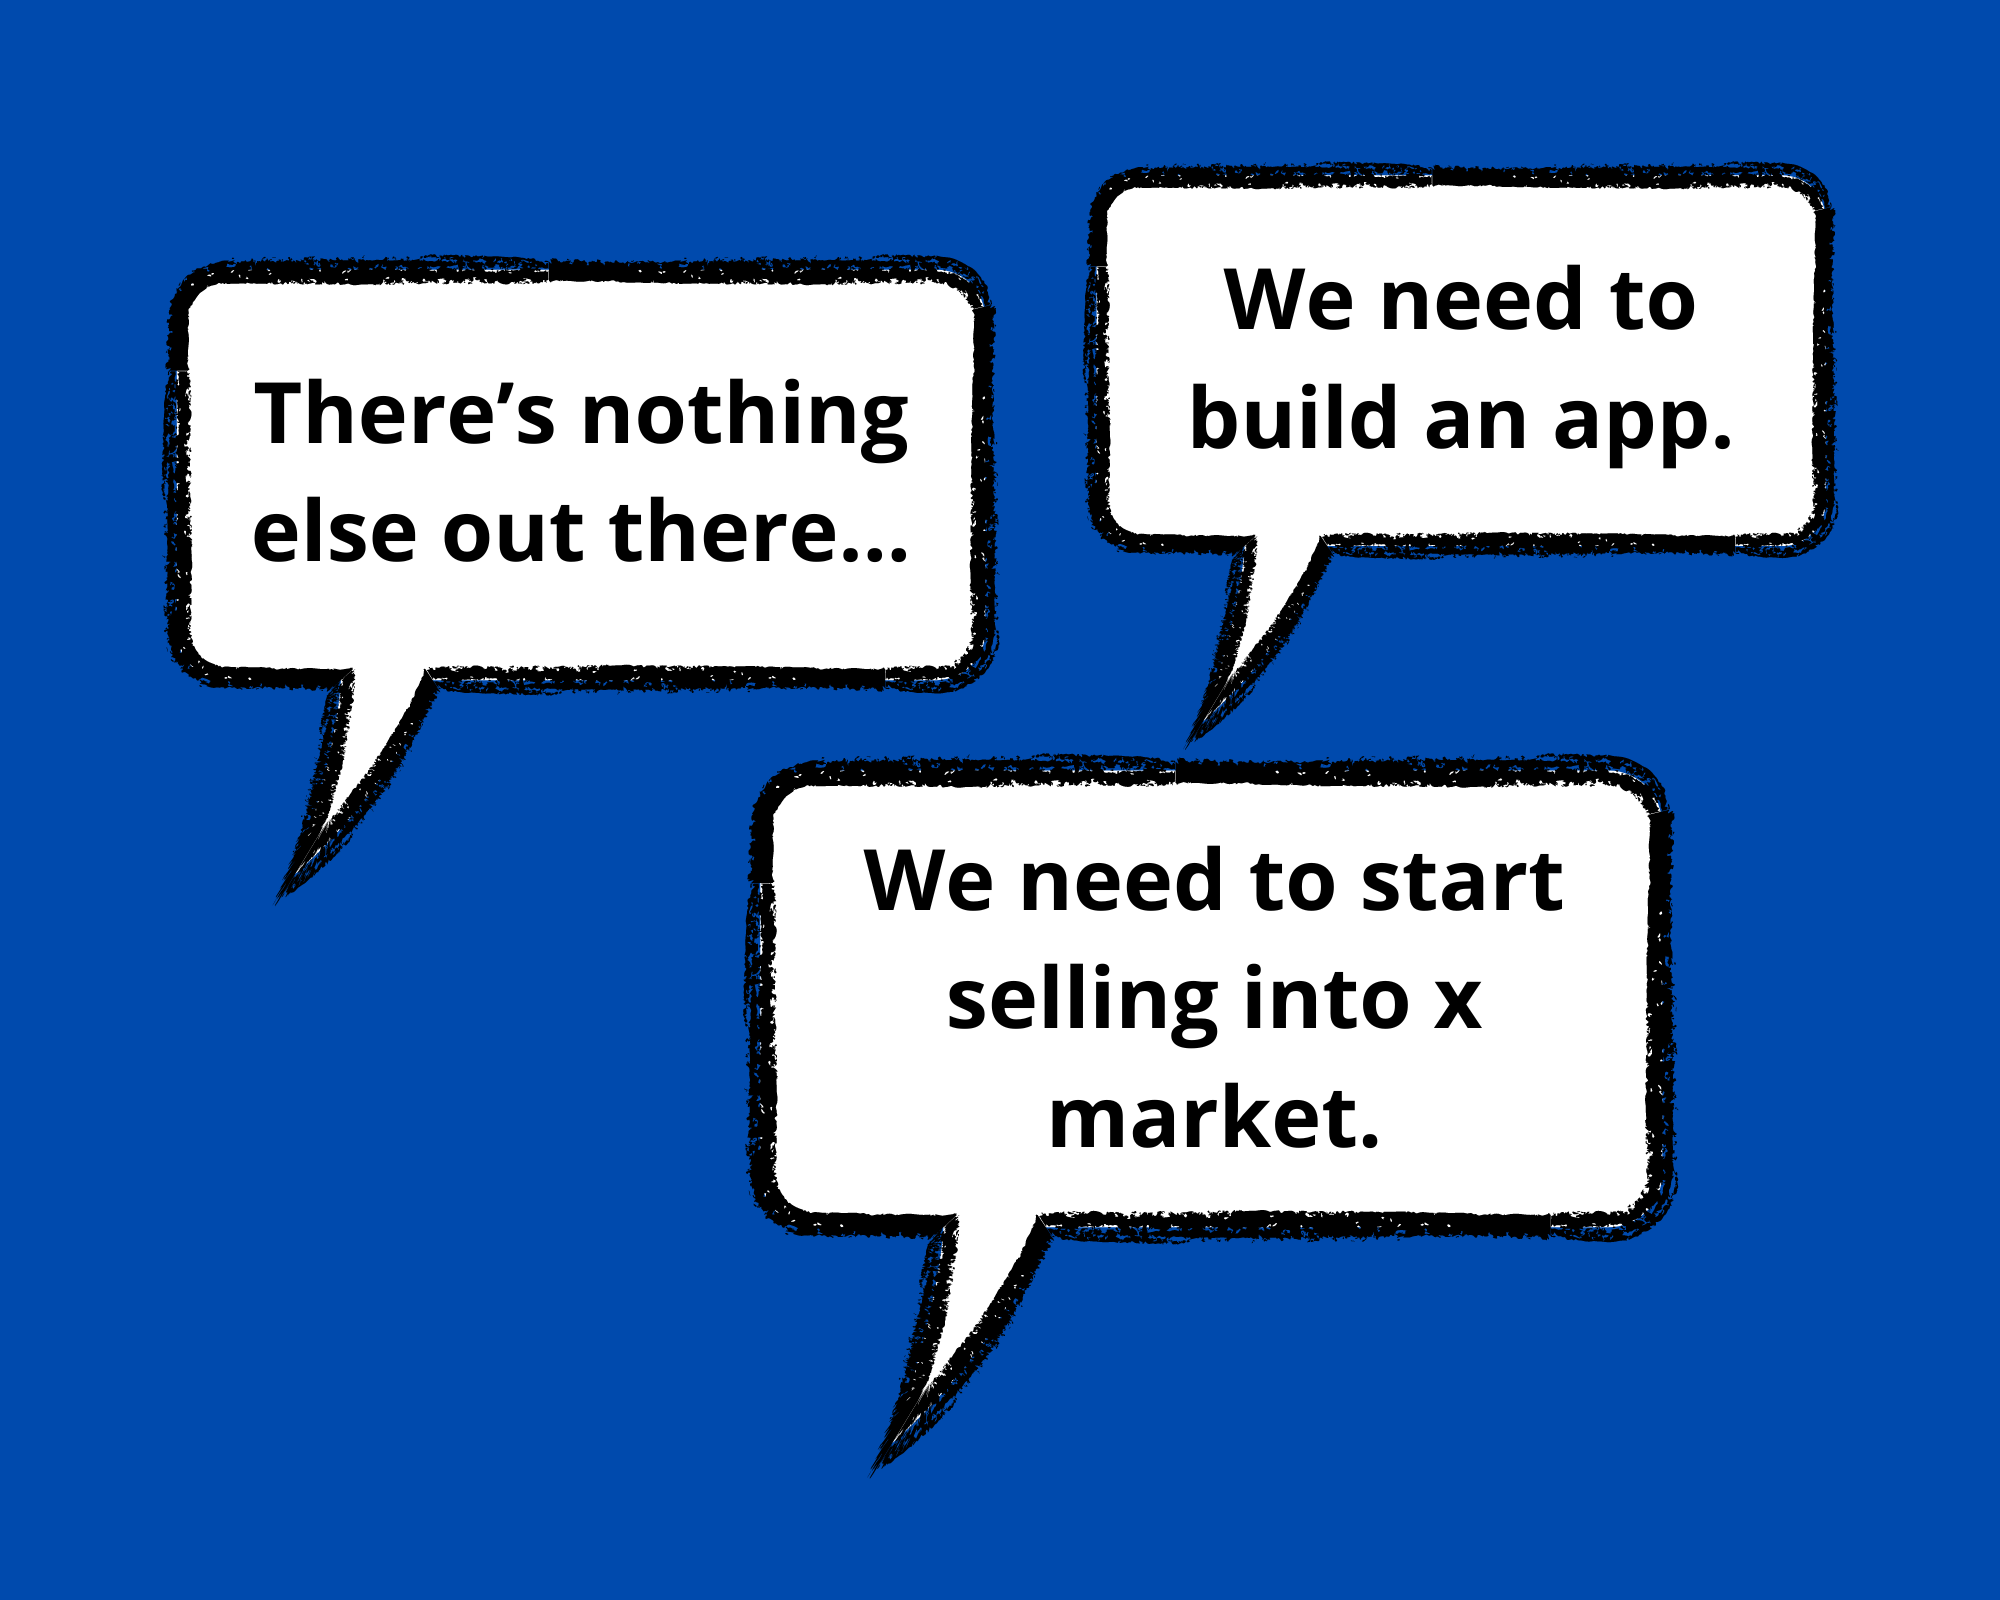 Speech bubbles on image which read: 

“We need to build an app.” 
“There’s nothing else out there.” 
“We need to start selling into x market.” 